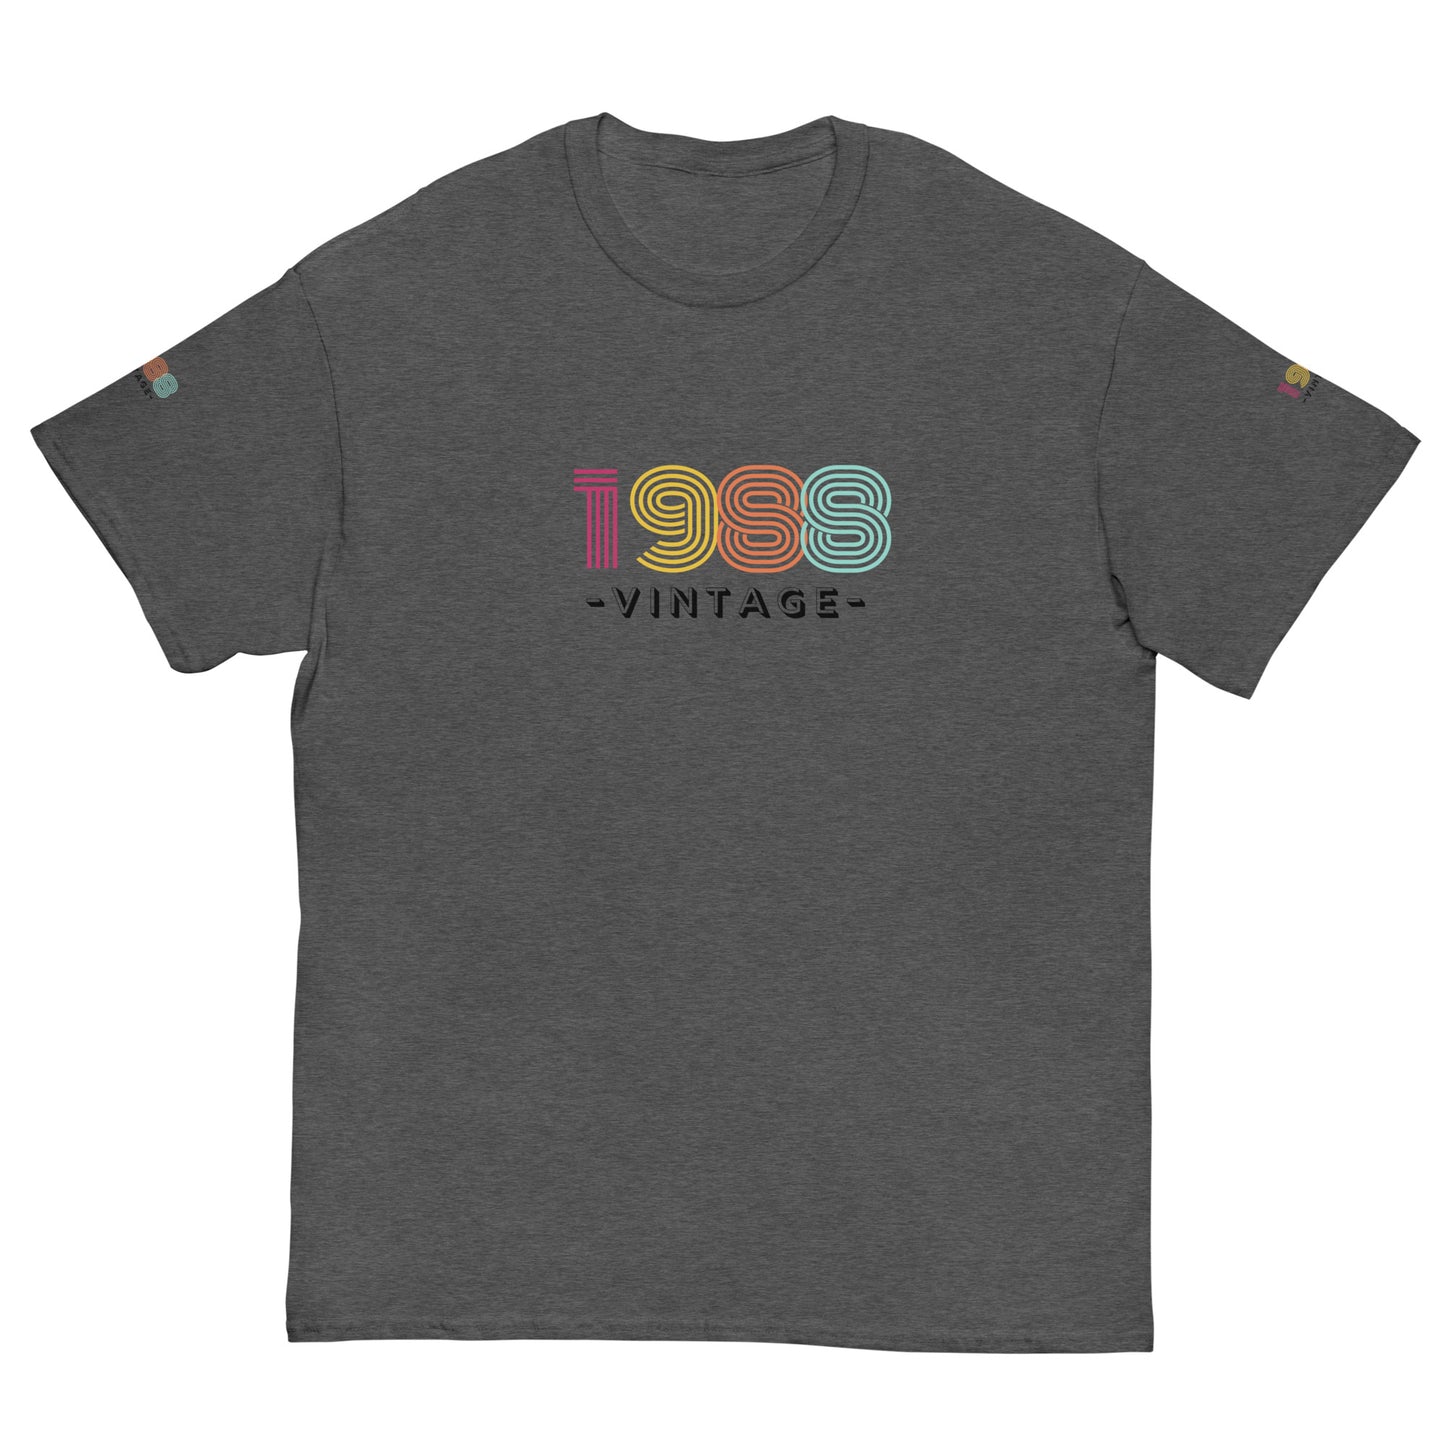 0-A-00 1988 vintage classic tee